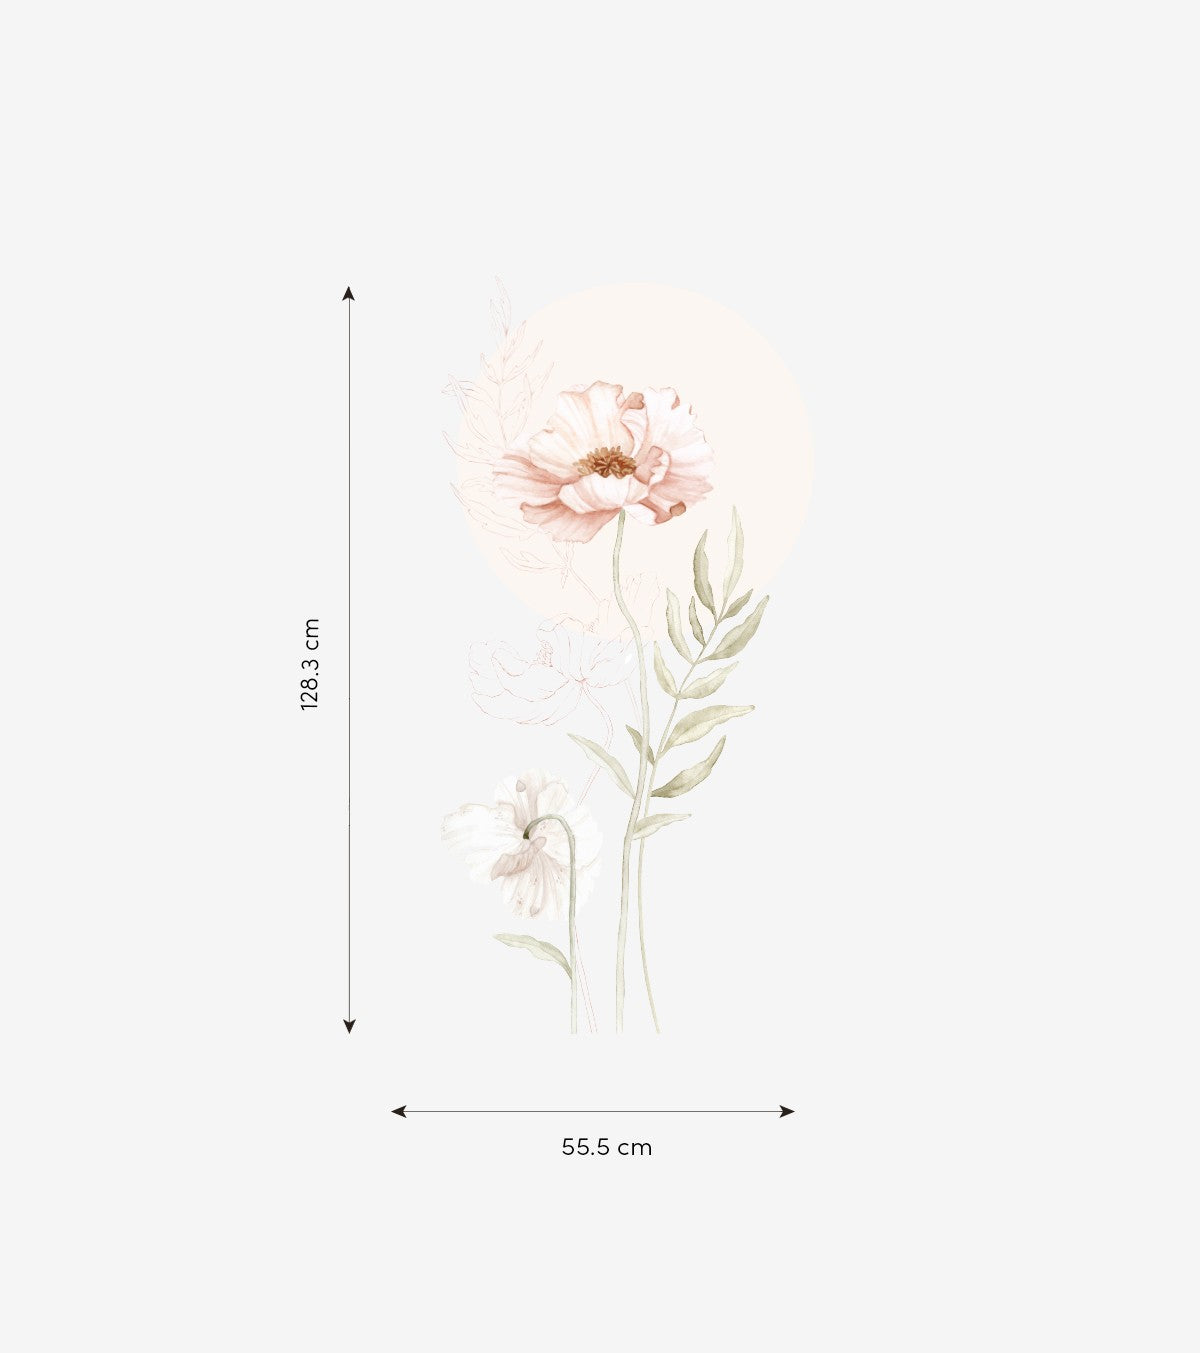 ISLANDIC POPPIES - Grands Wall decals - The poppy